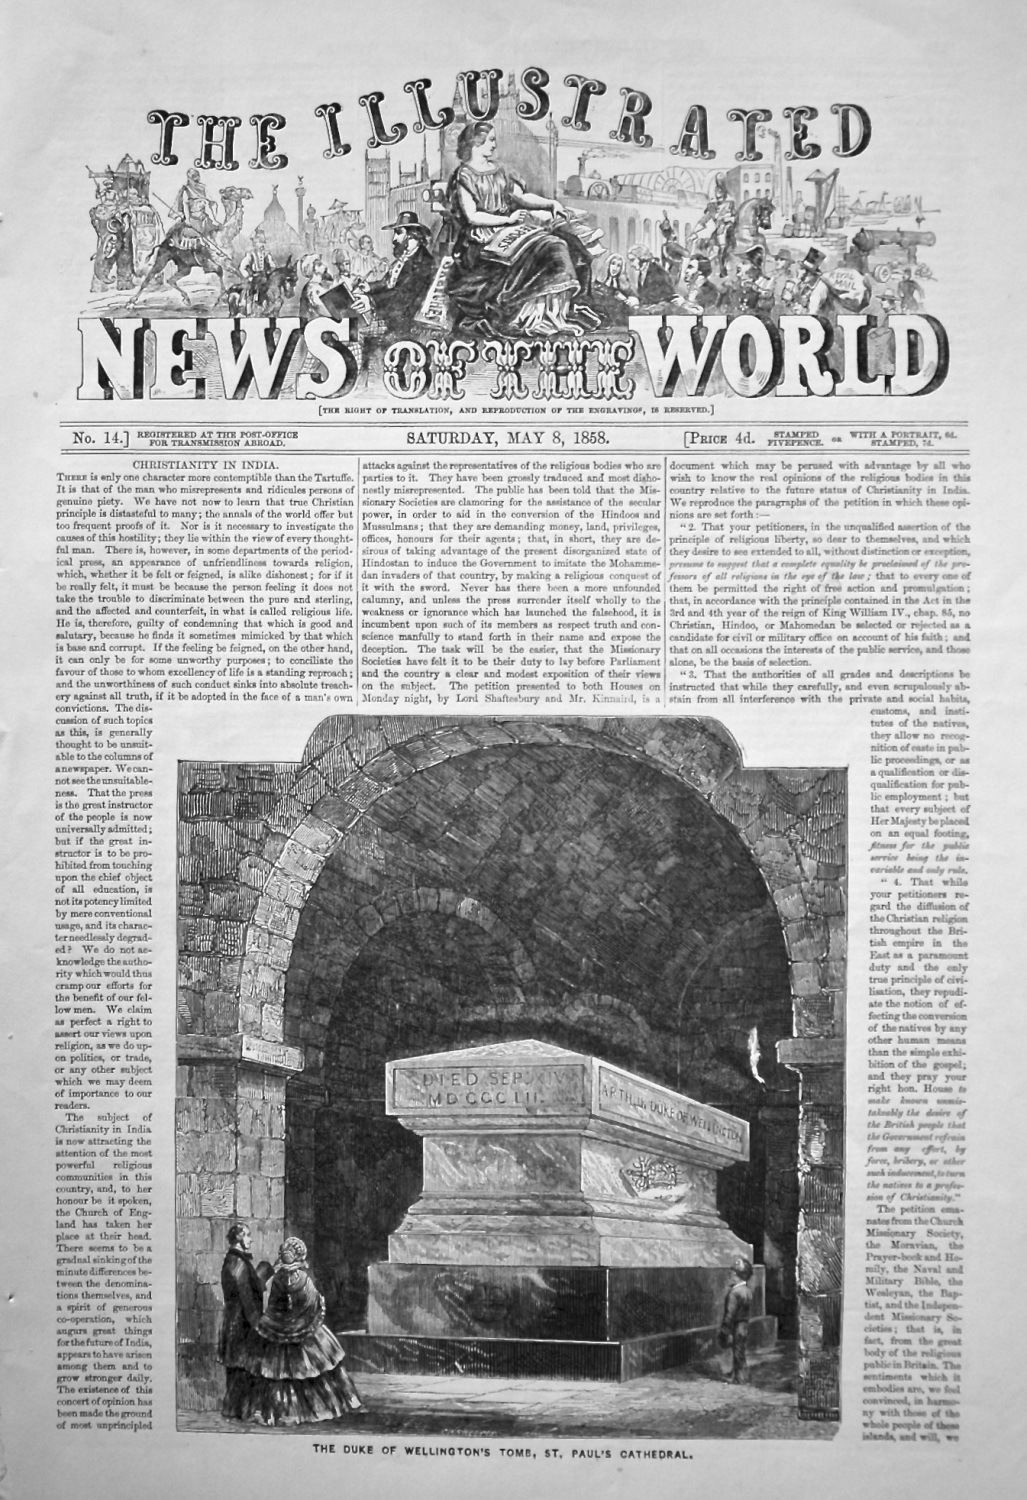 The Illustrated News of the World,  May 8th, 1858.